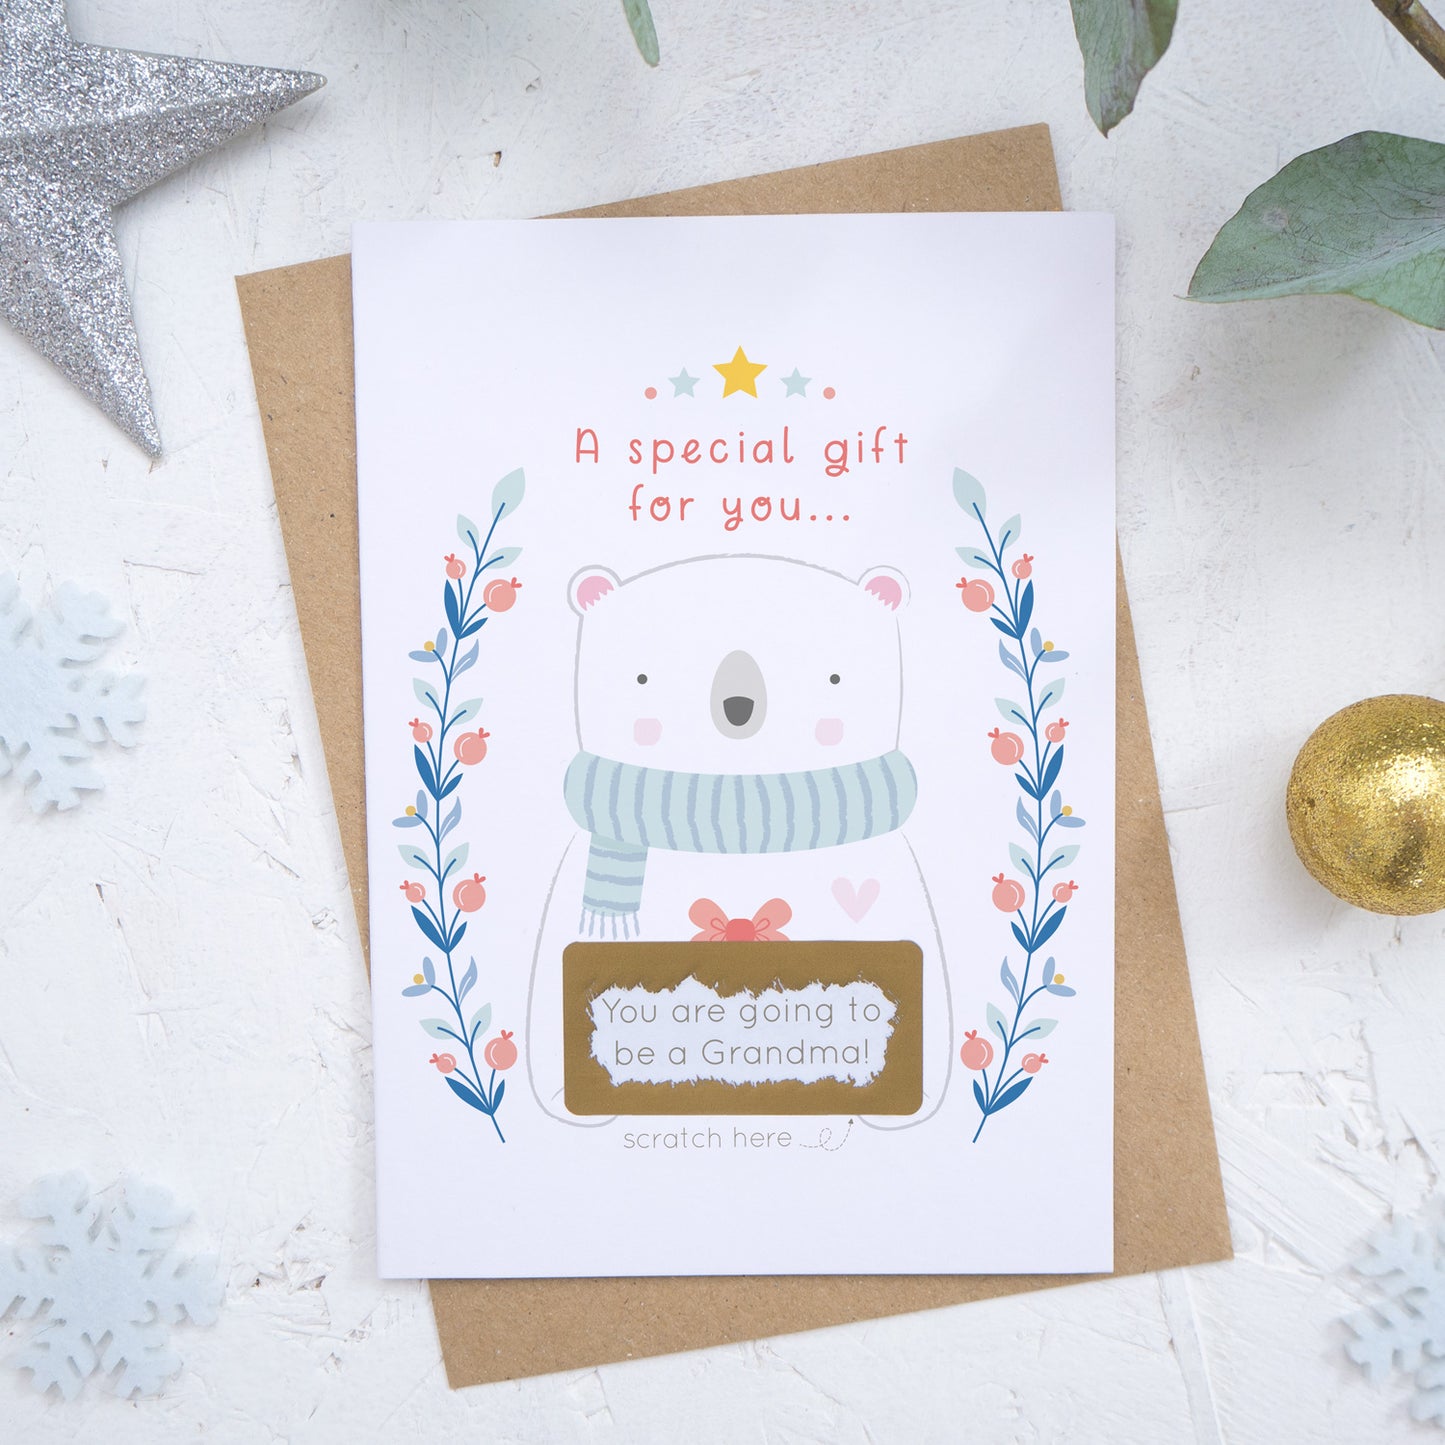 A Christmas baby announcement scratch card that has just been scratched off where the message reads 'you are going to be a grandma'. The card is on a white background surrounded with baubles, foliage and snow flakes